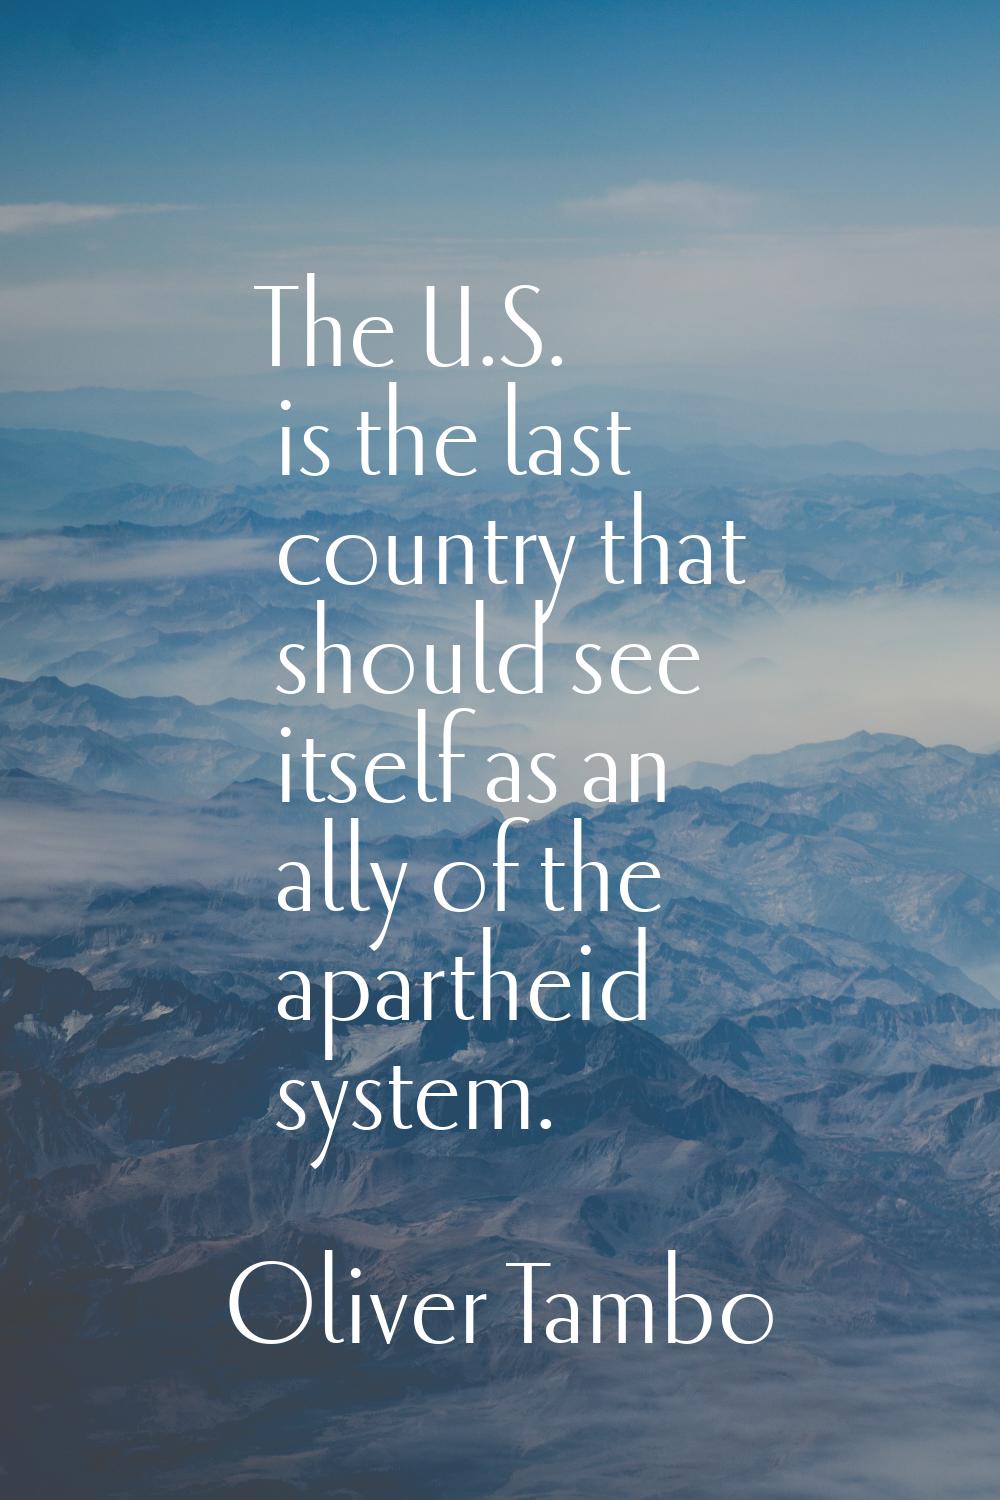 The U.S. is the last country that should see itself as an ally of the apartheid system.